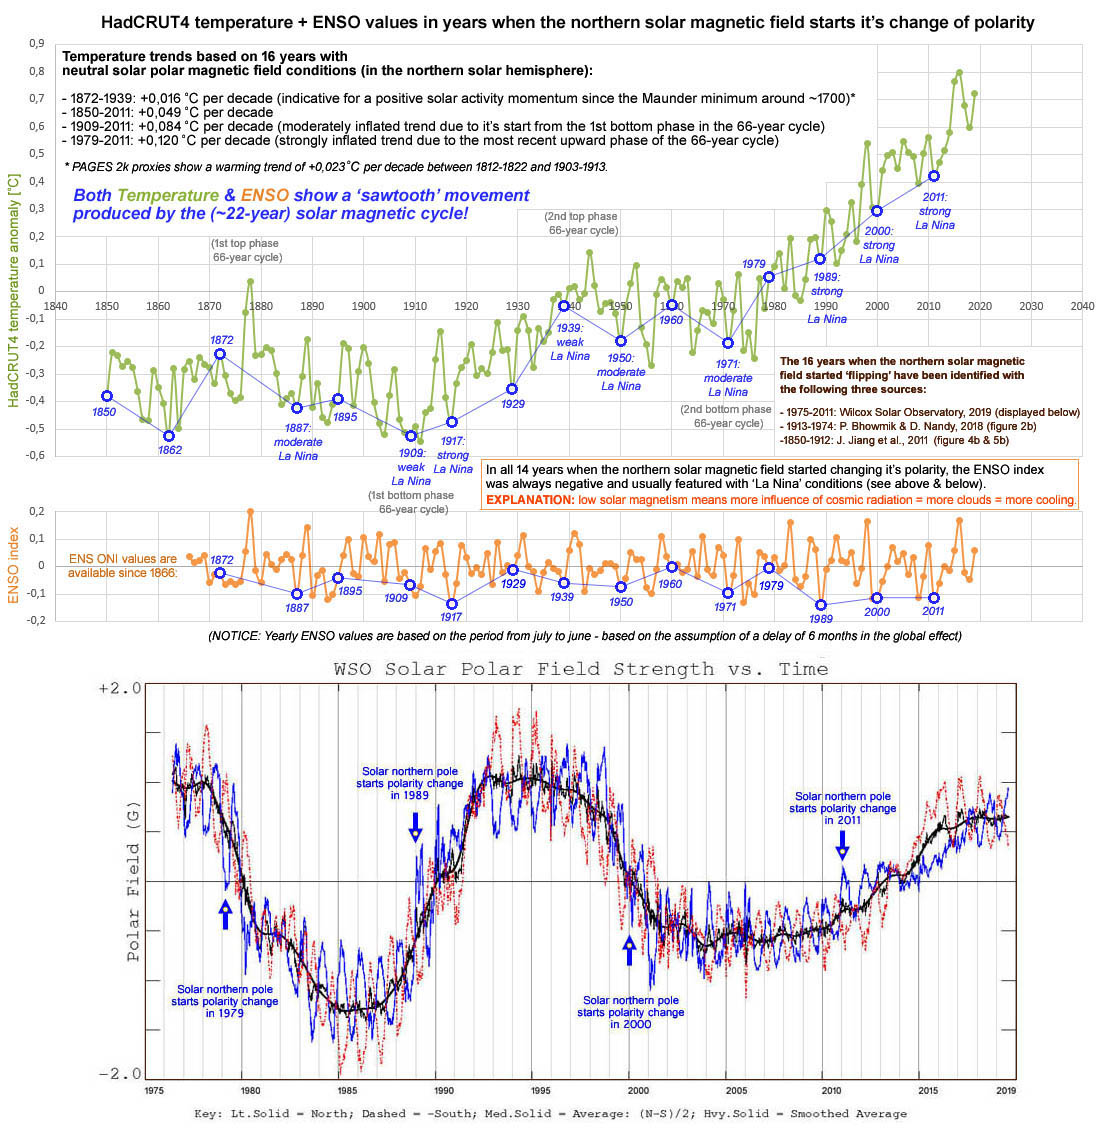 Figure 9: HadCRUT4 temperature + ENSO values in years when the magnetic north pole of the sun changes polarity